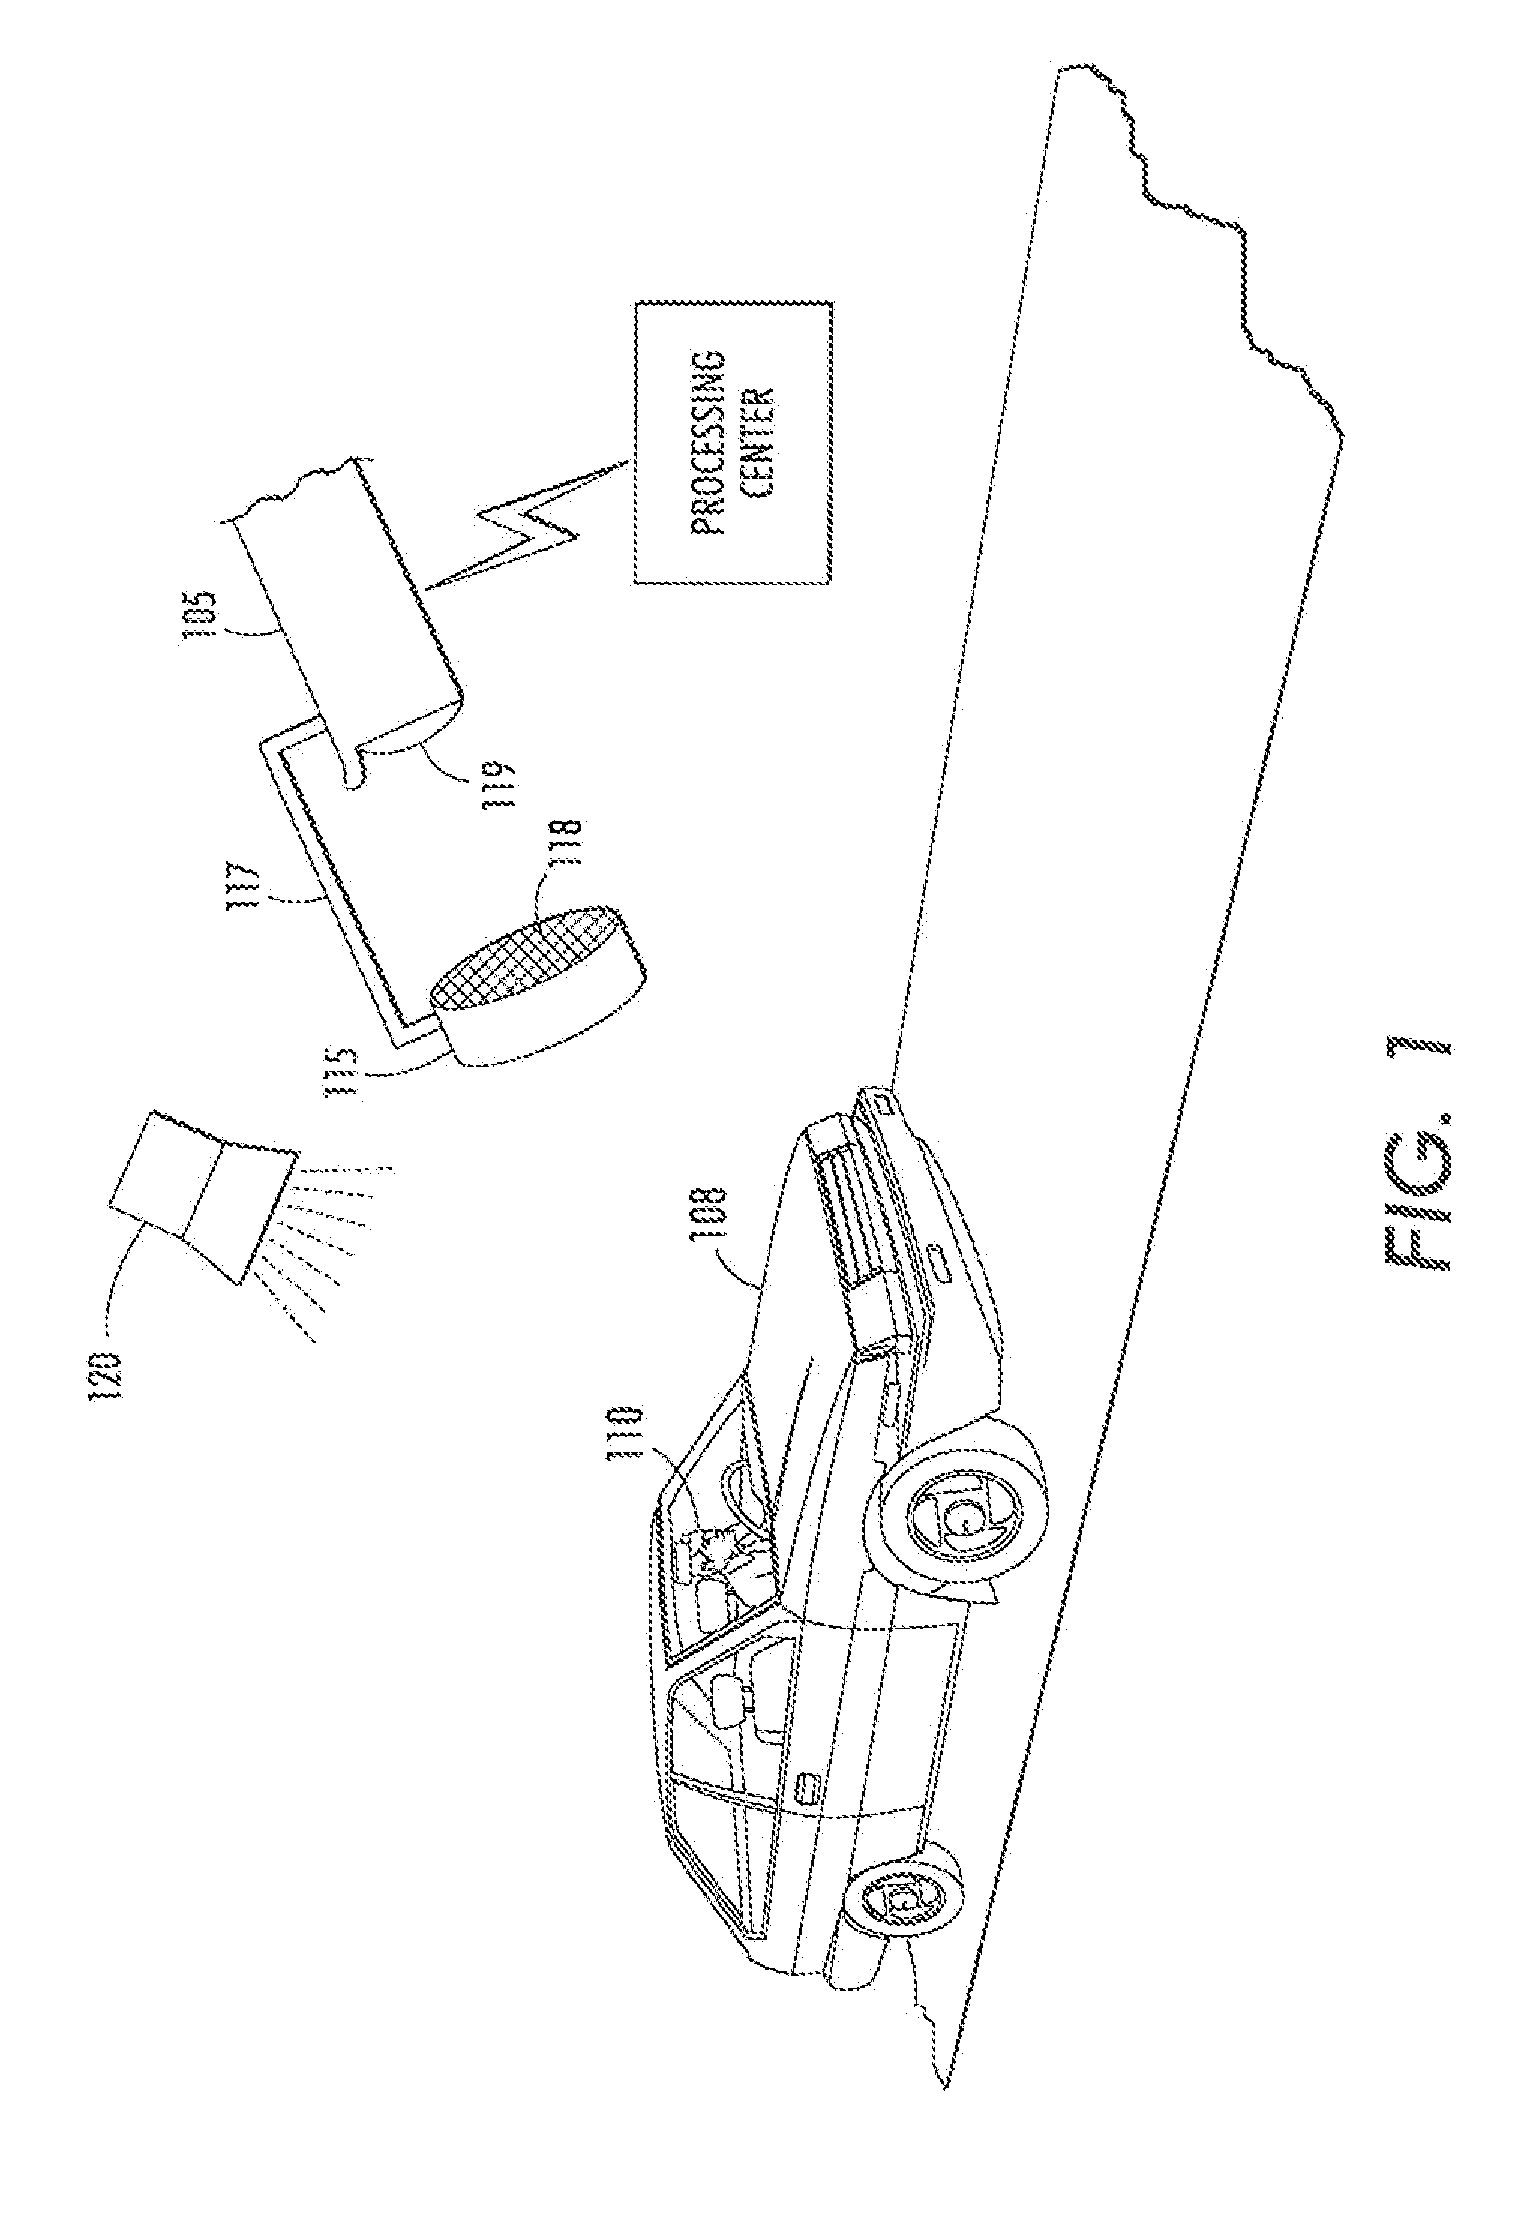 Systems and methods for detecting cell phone usage by a vehicle operator